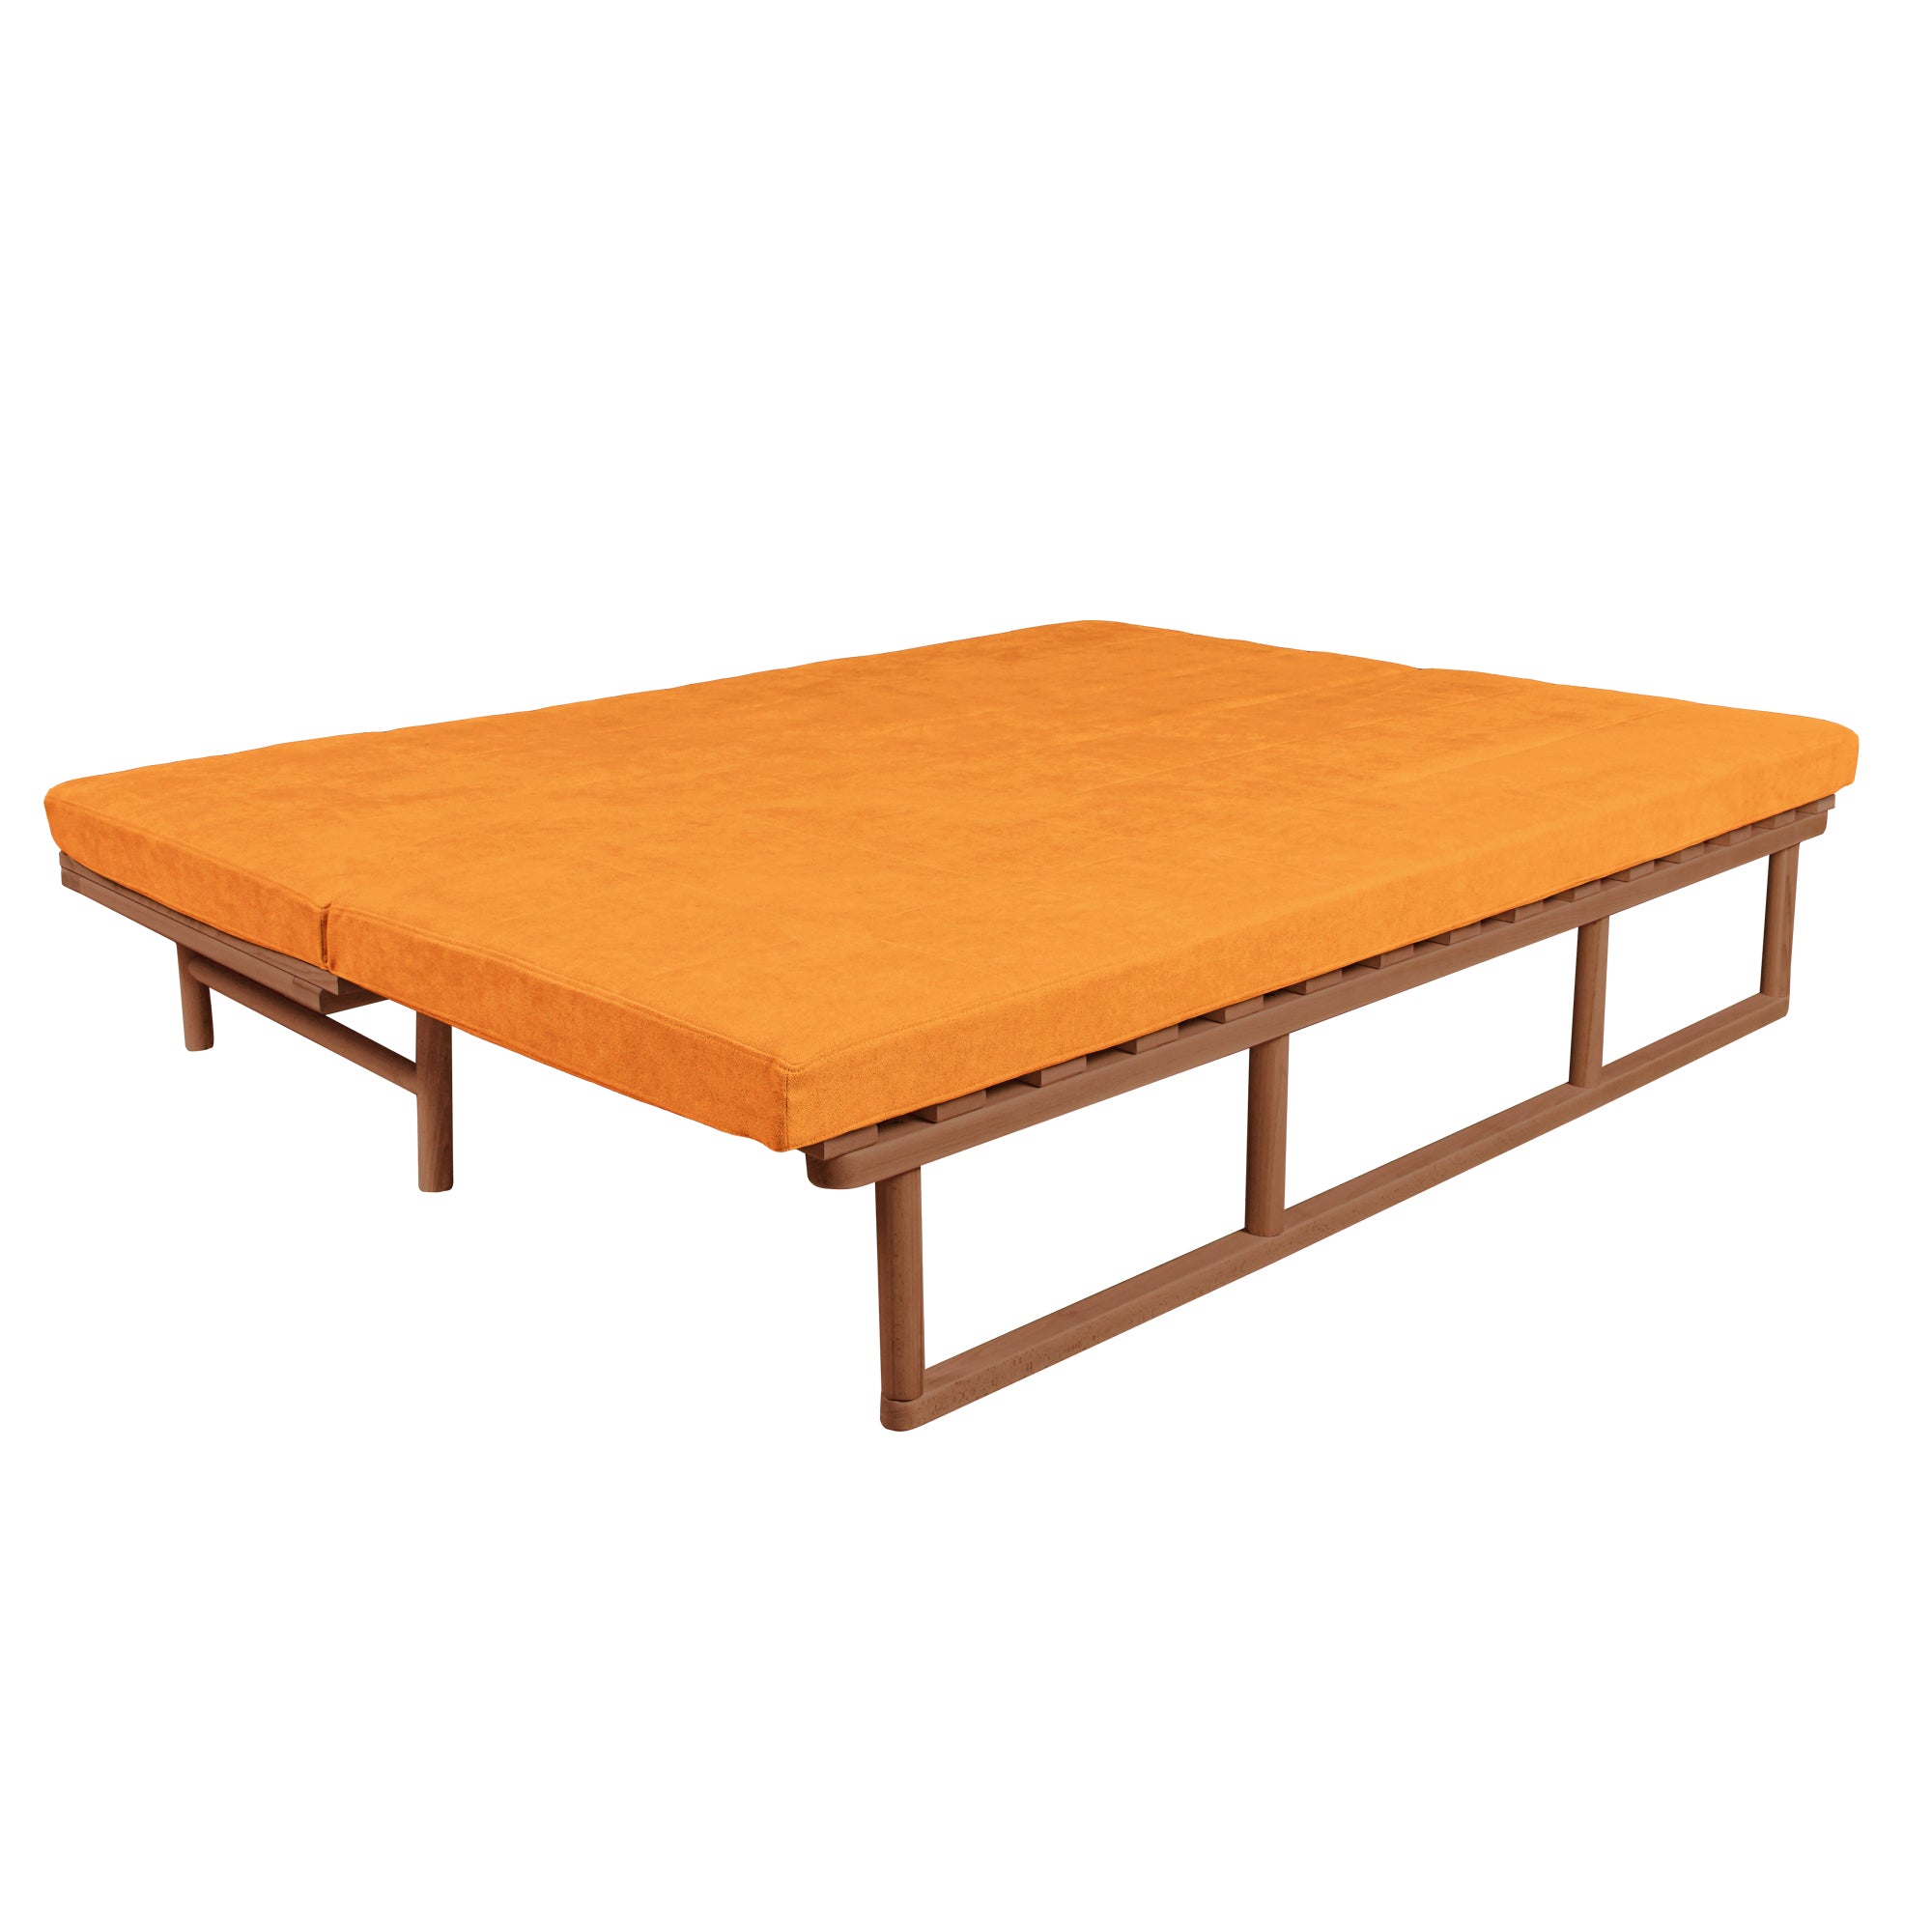 Le MAR Folding Daybed, Beech Wood Frame, Caramel Colour-orange upholstery-folded view